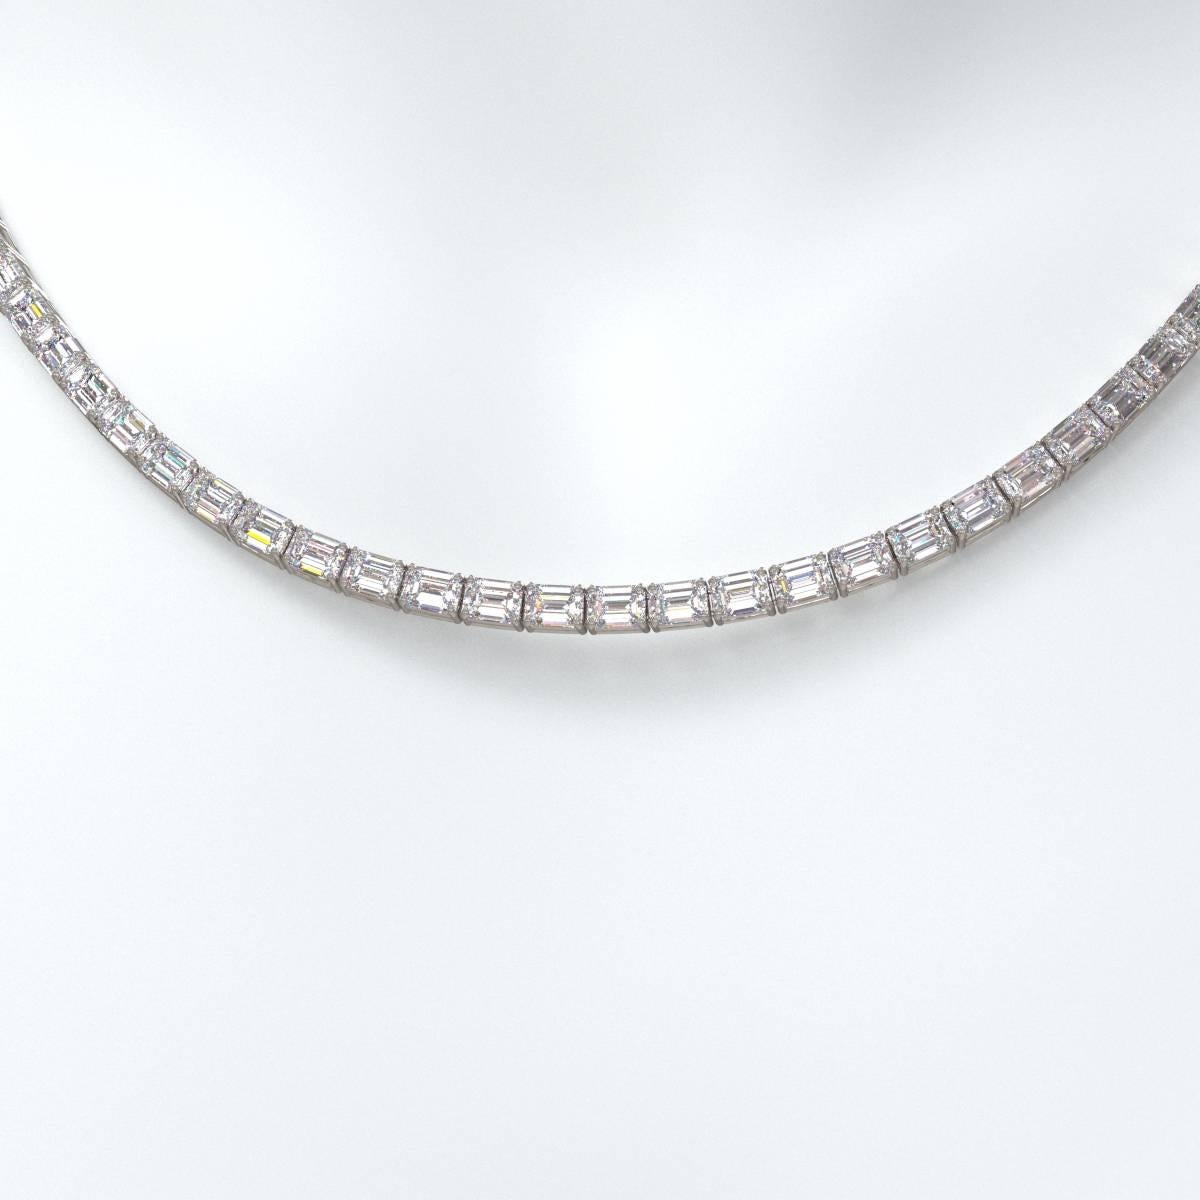 From Emilio Jewelry New York, a well known dealer located on New York's iconic Fifth Avenue.

Hand made by our team. This exceptional classic necklace features each, and every emerald cut diamond is Gia certified. This is a very unique necklace as